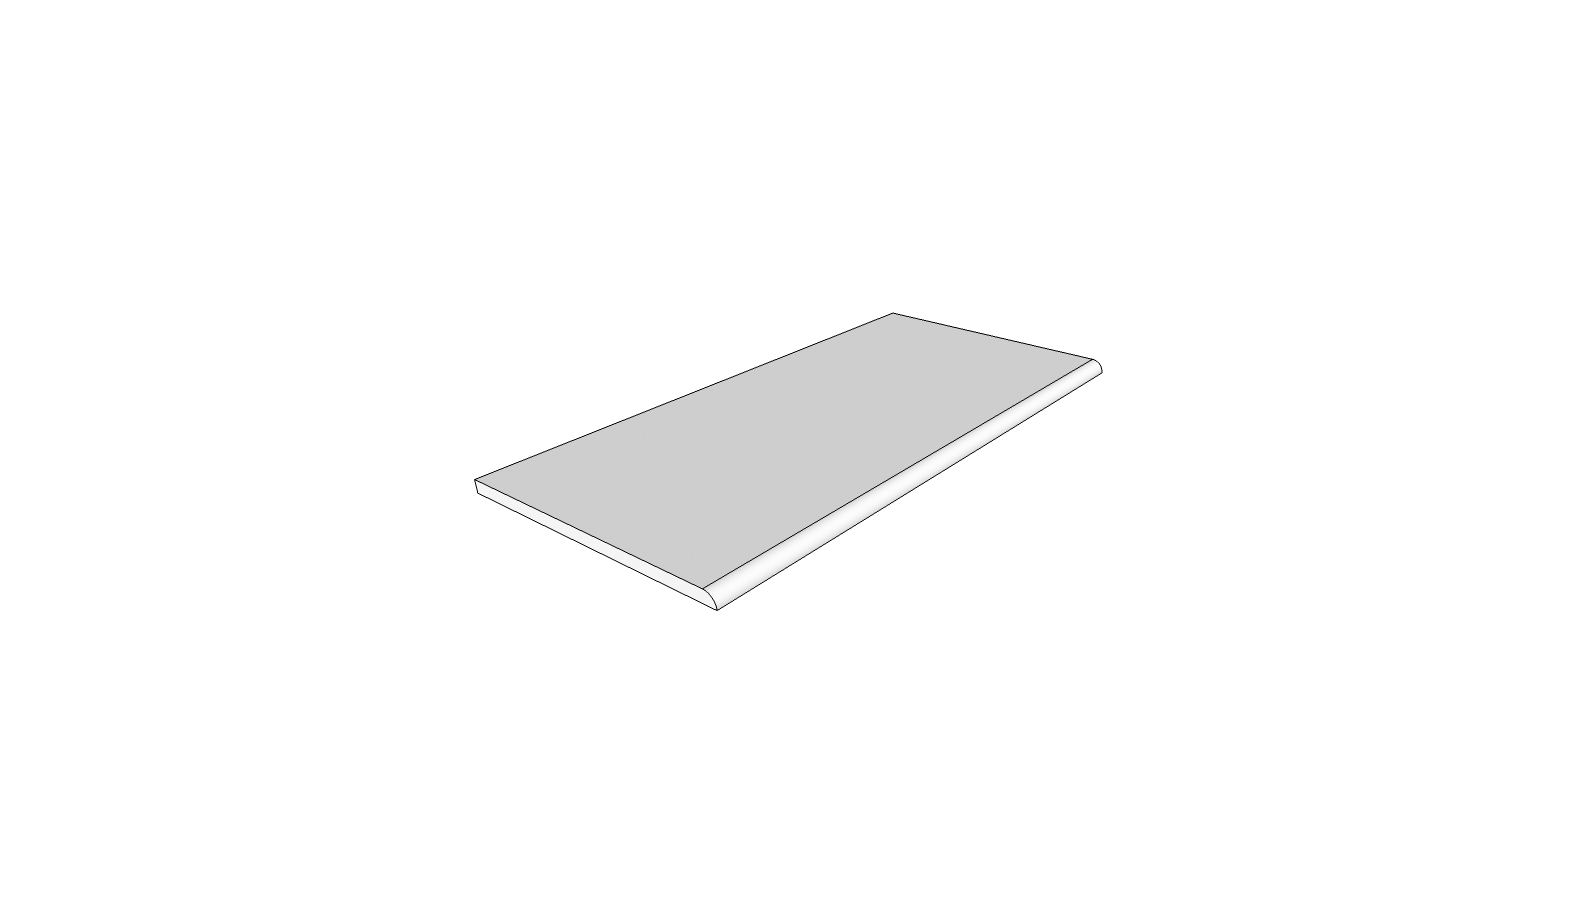 Bullnose surface rounded edge <span style="white-space:nowrap;">12"x24"</span>   <span style="white-space:nowrap;">thk. 20mm</span>